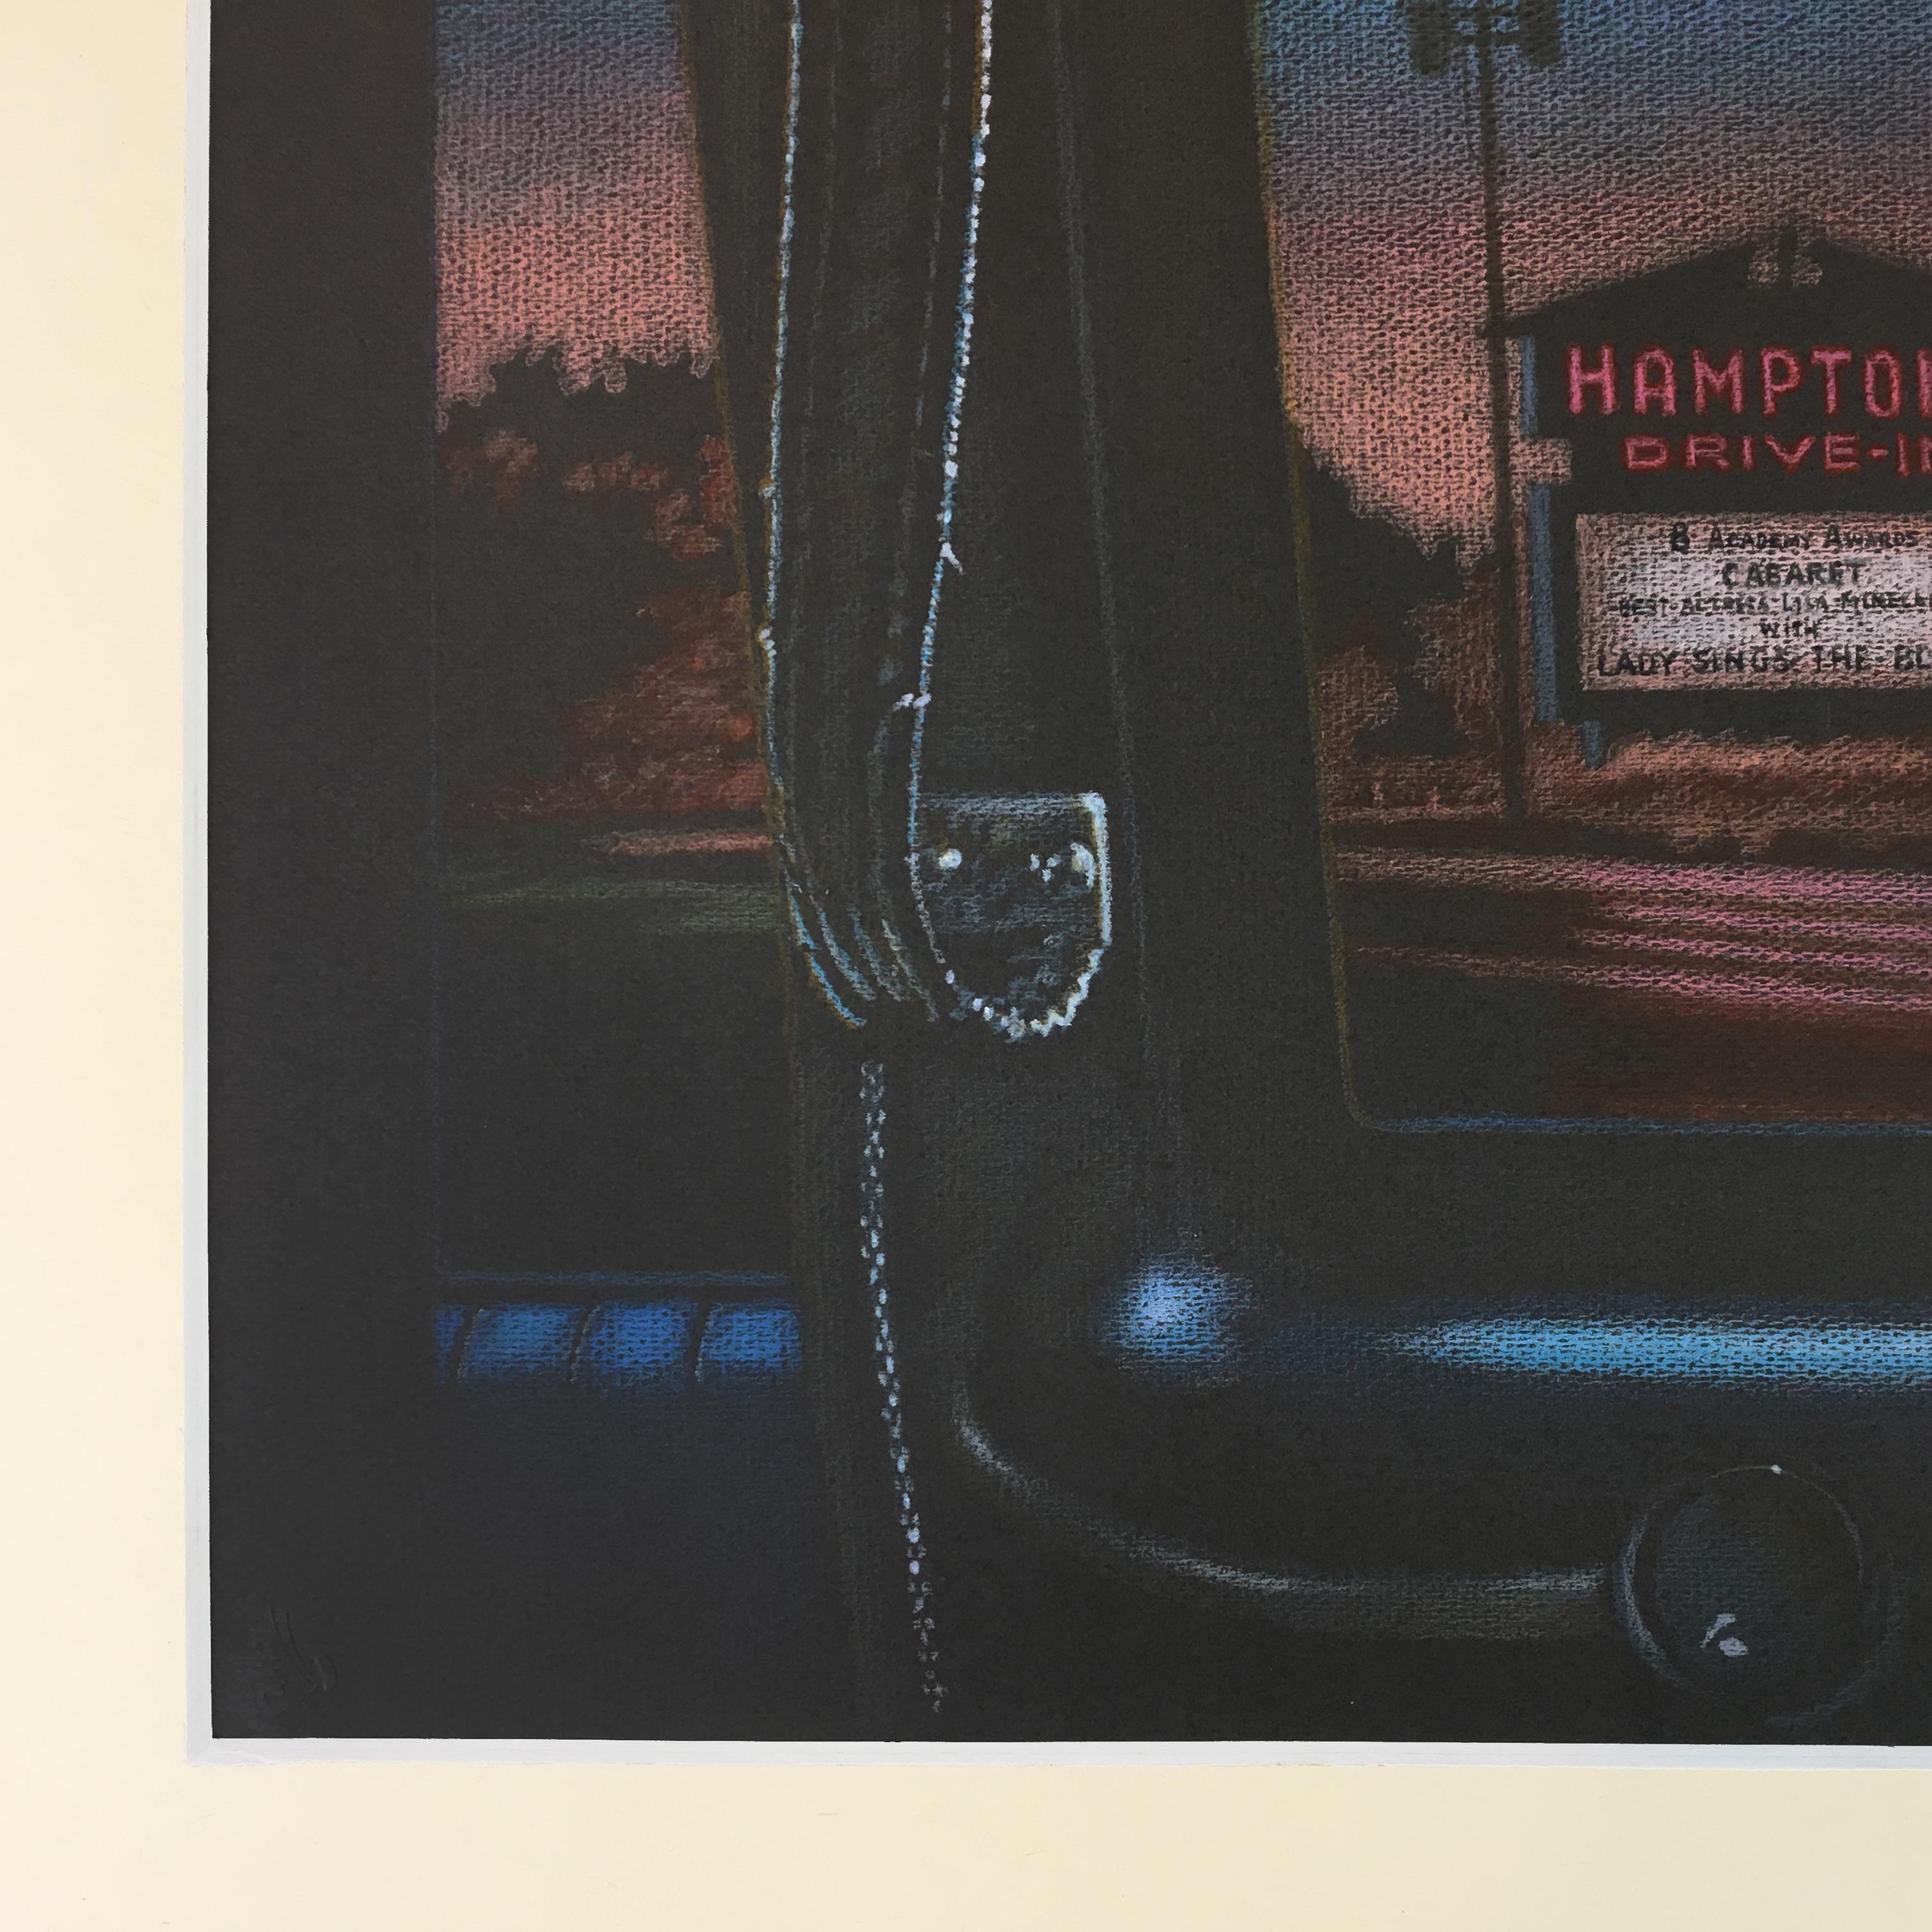 Matting: 32.5 x 27.5
Paper: 25.5 x 19.75

Pastel on black textured paper, in cream-colored natural fiber matting. 

This work features one of Kanovitz' favorite subjects: a drive in movie theater in the Hamptons. Kanovitz, whose artistic output was